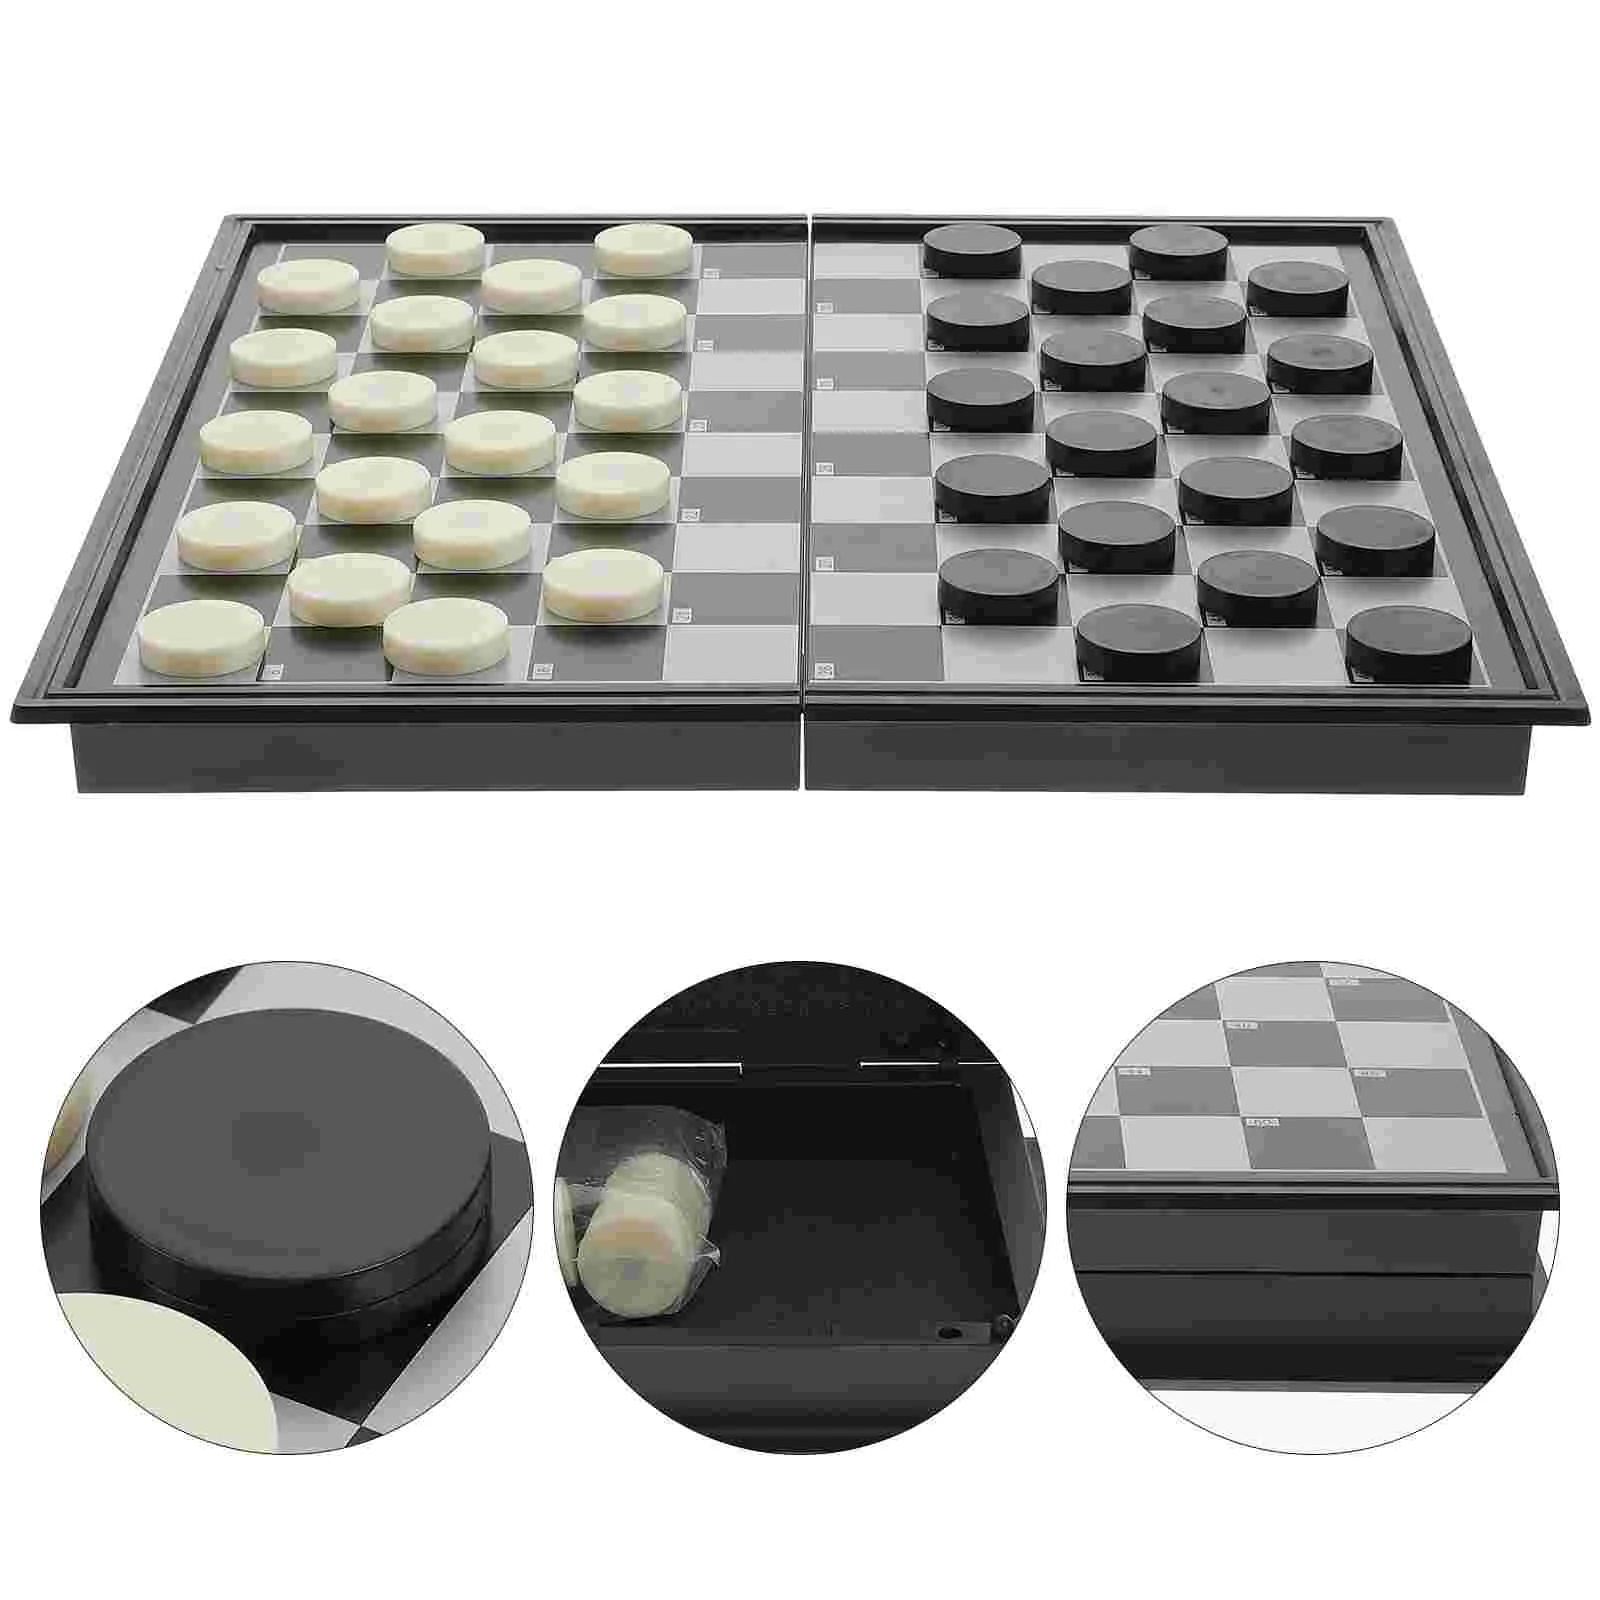 

Checkers Magnetic International Kid Competition Toy Kids Toys Beneficial Chess Games Desktop Indoor Travel Recreational